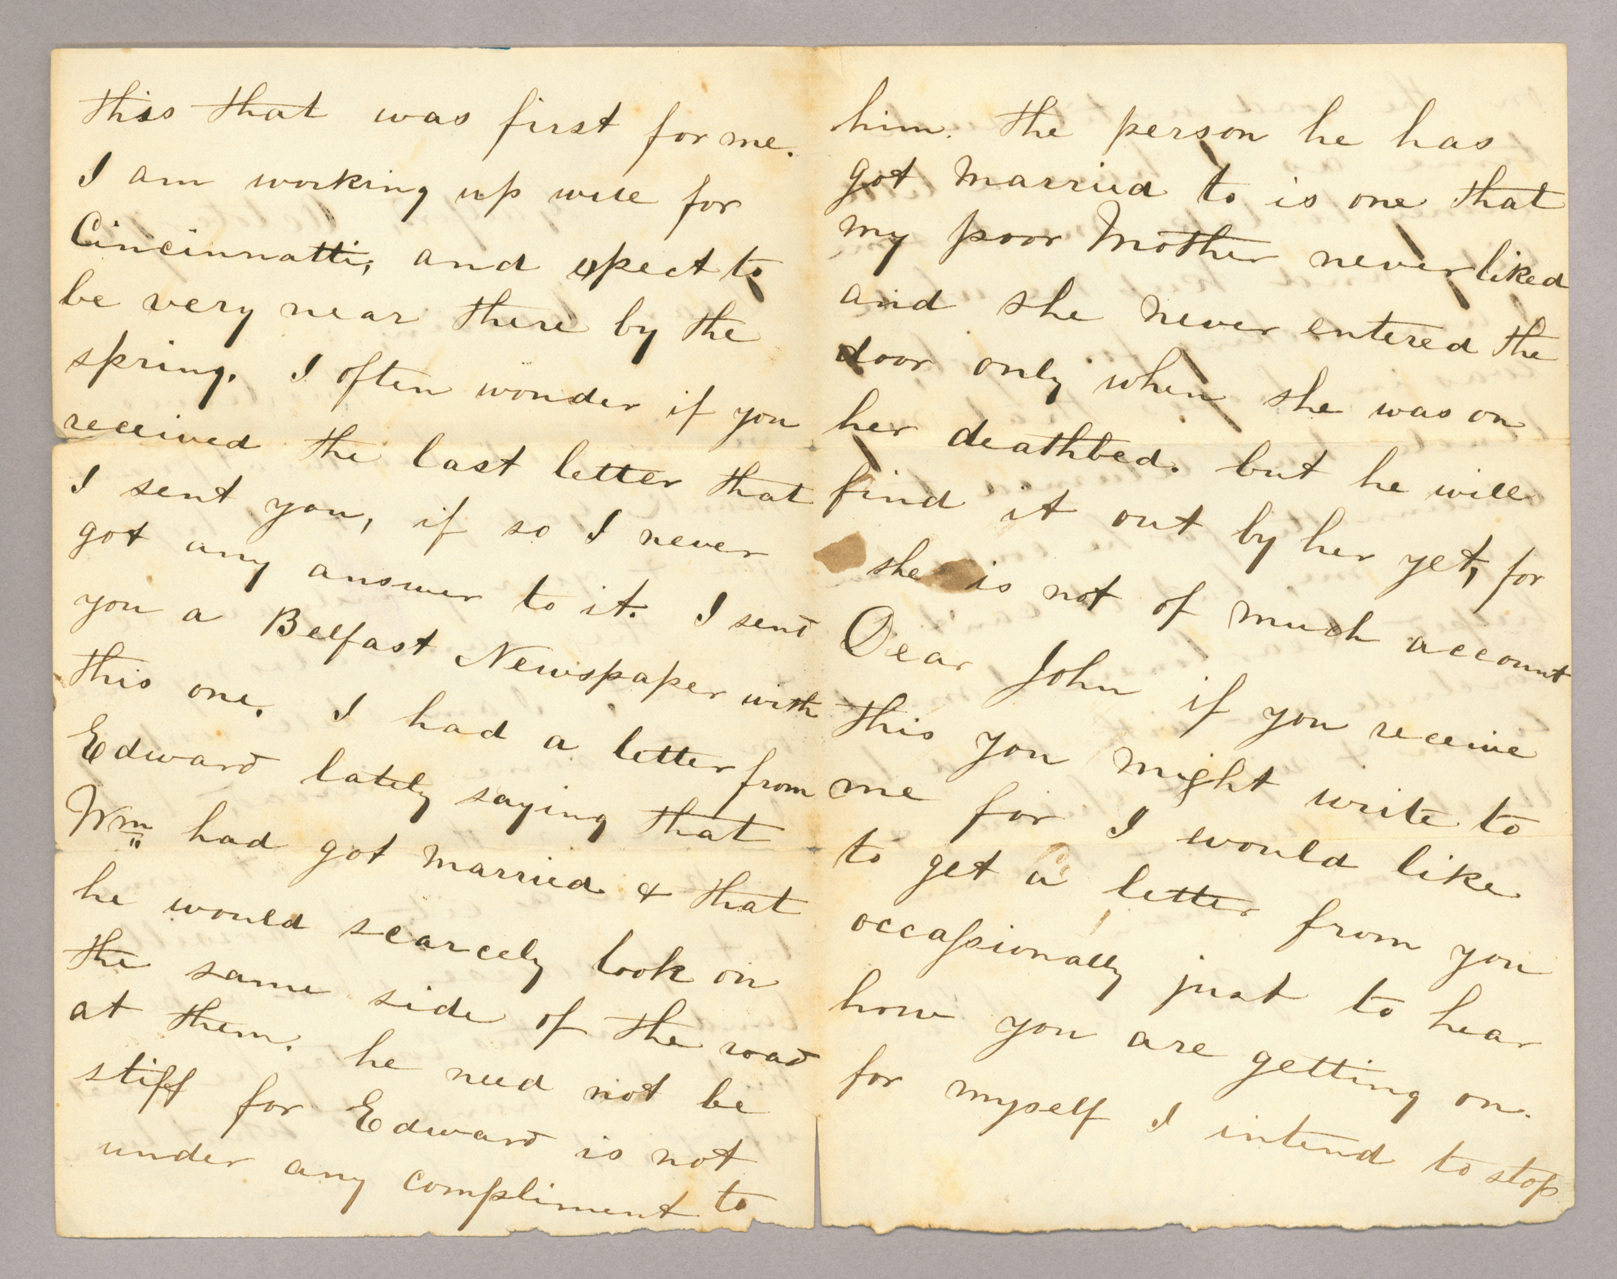 Letter. Robert L. Oldham, Guilford, Ohio, to "Dear Cousin" [John E. Brownlee], n. p., Pages 2-3